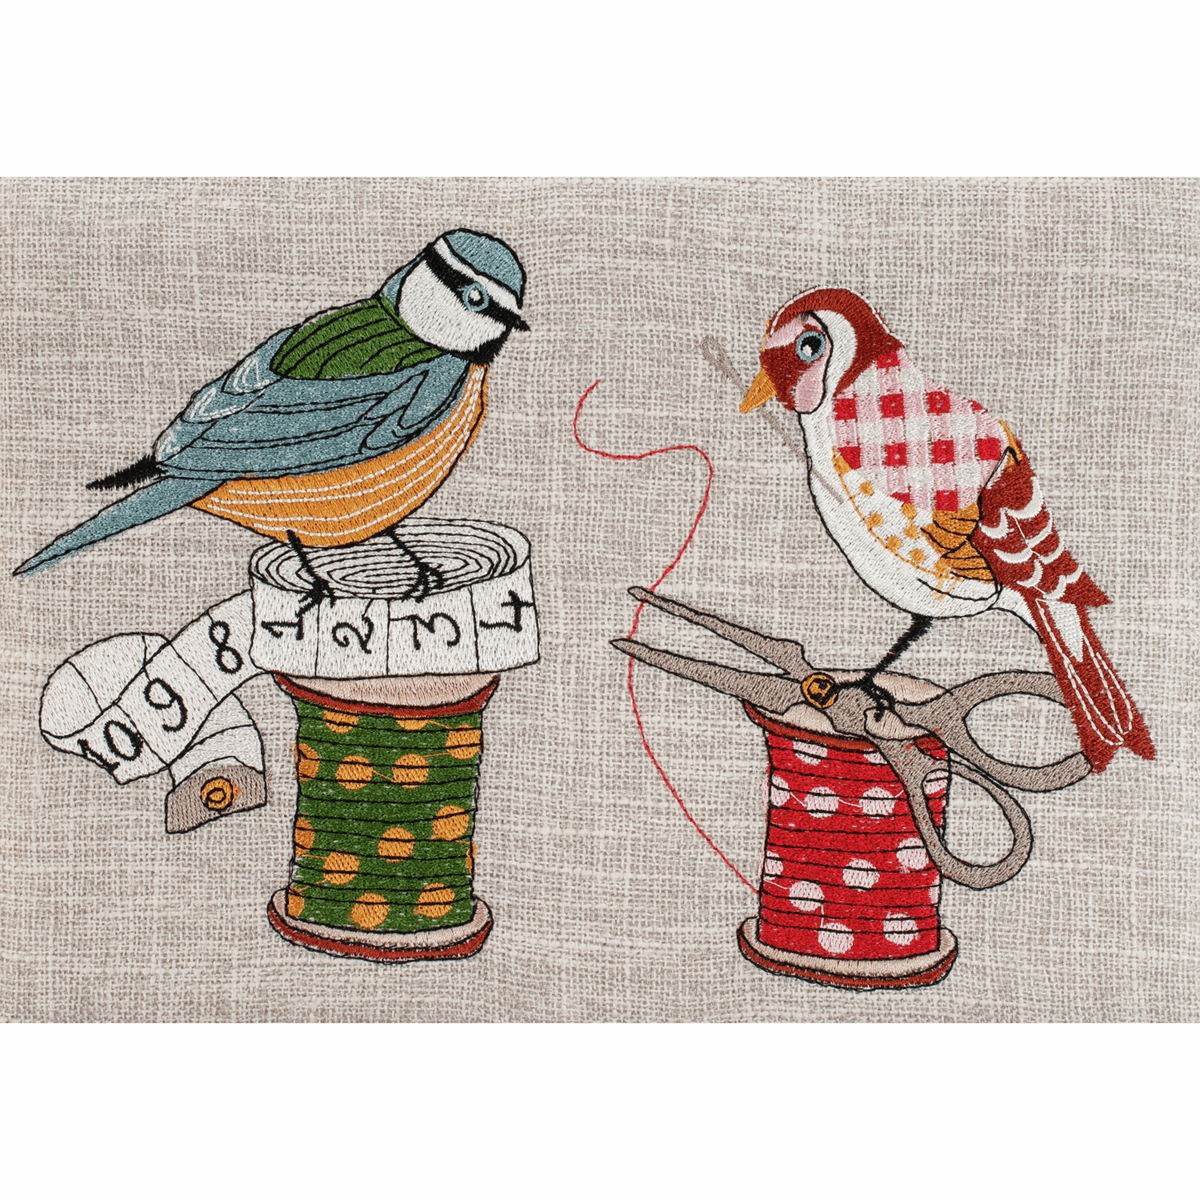 Birds on Bobbin Sewing Box with Embroidered Lid - Medium